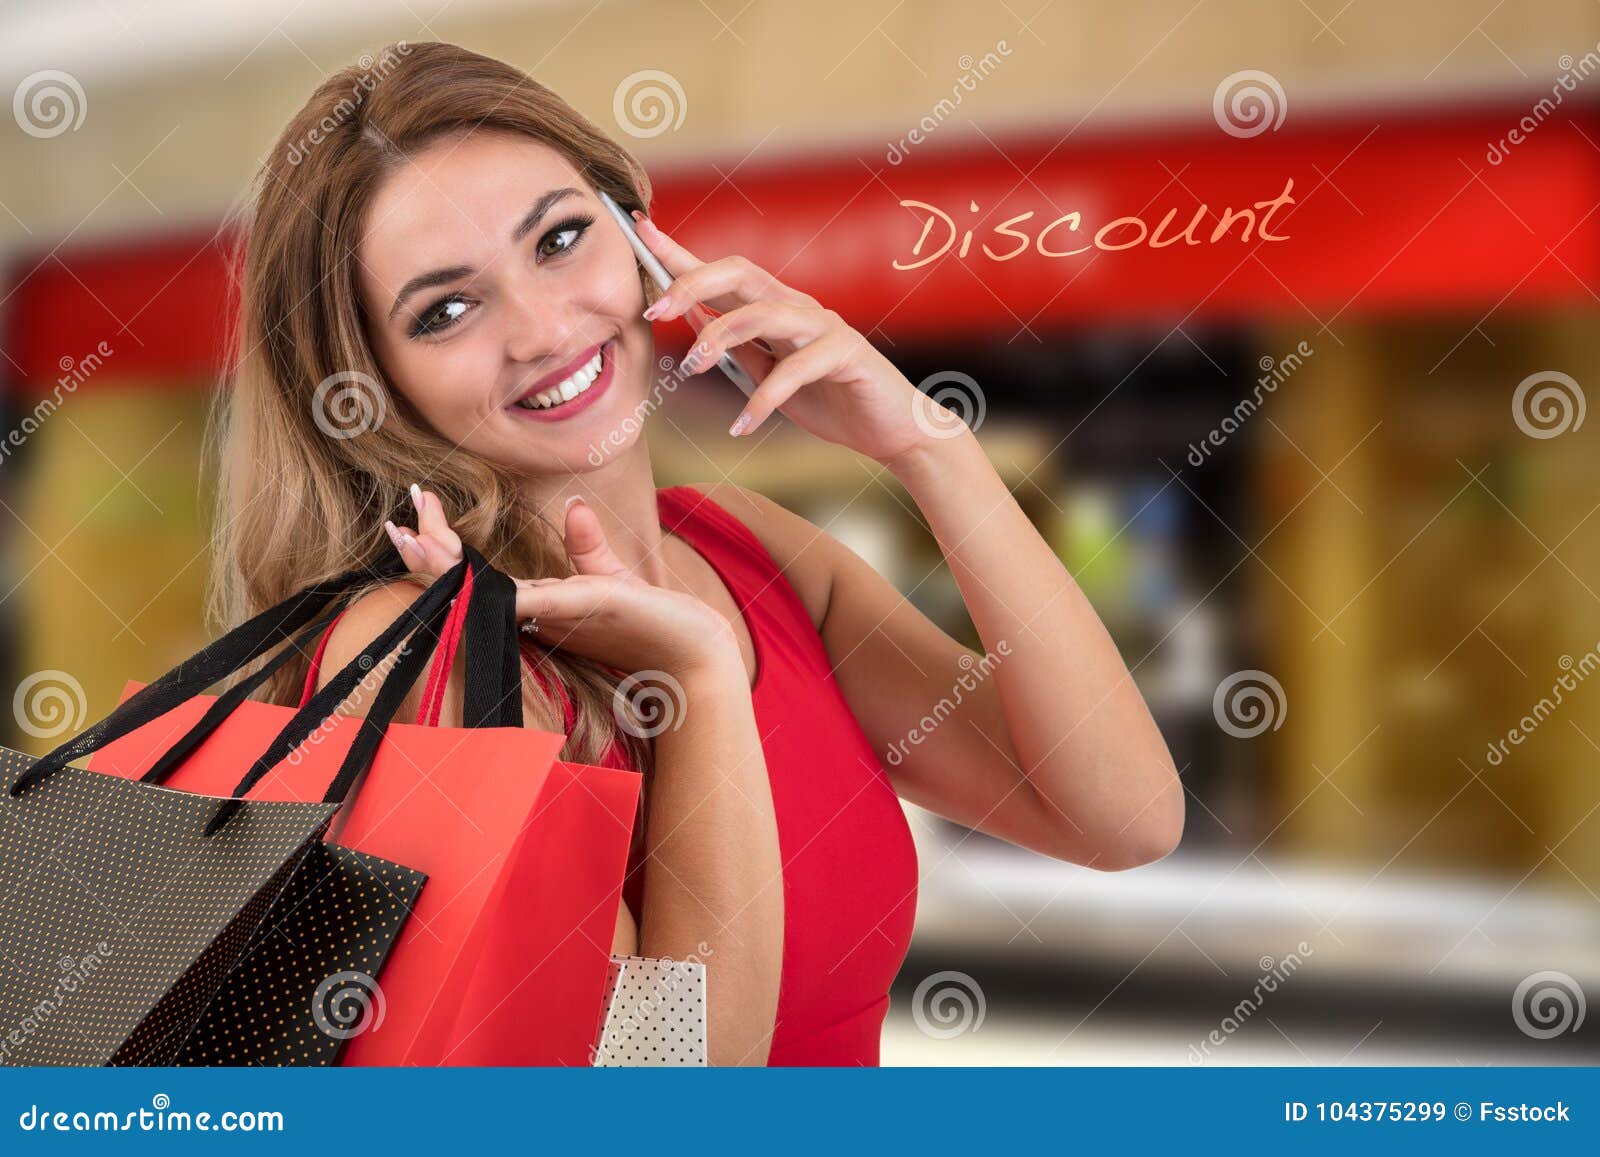 Shopping Woman Holding Bags, Shopping Mall Scene. Stock Image - Image ...